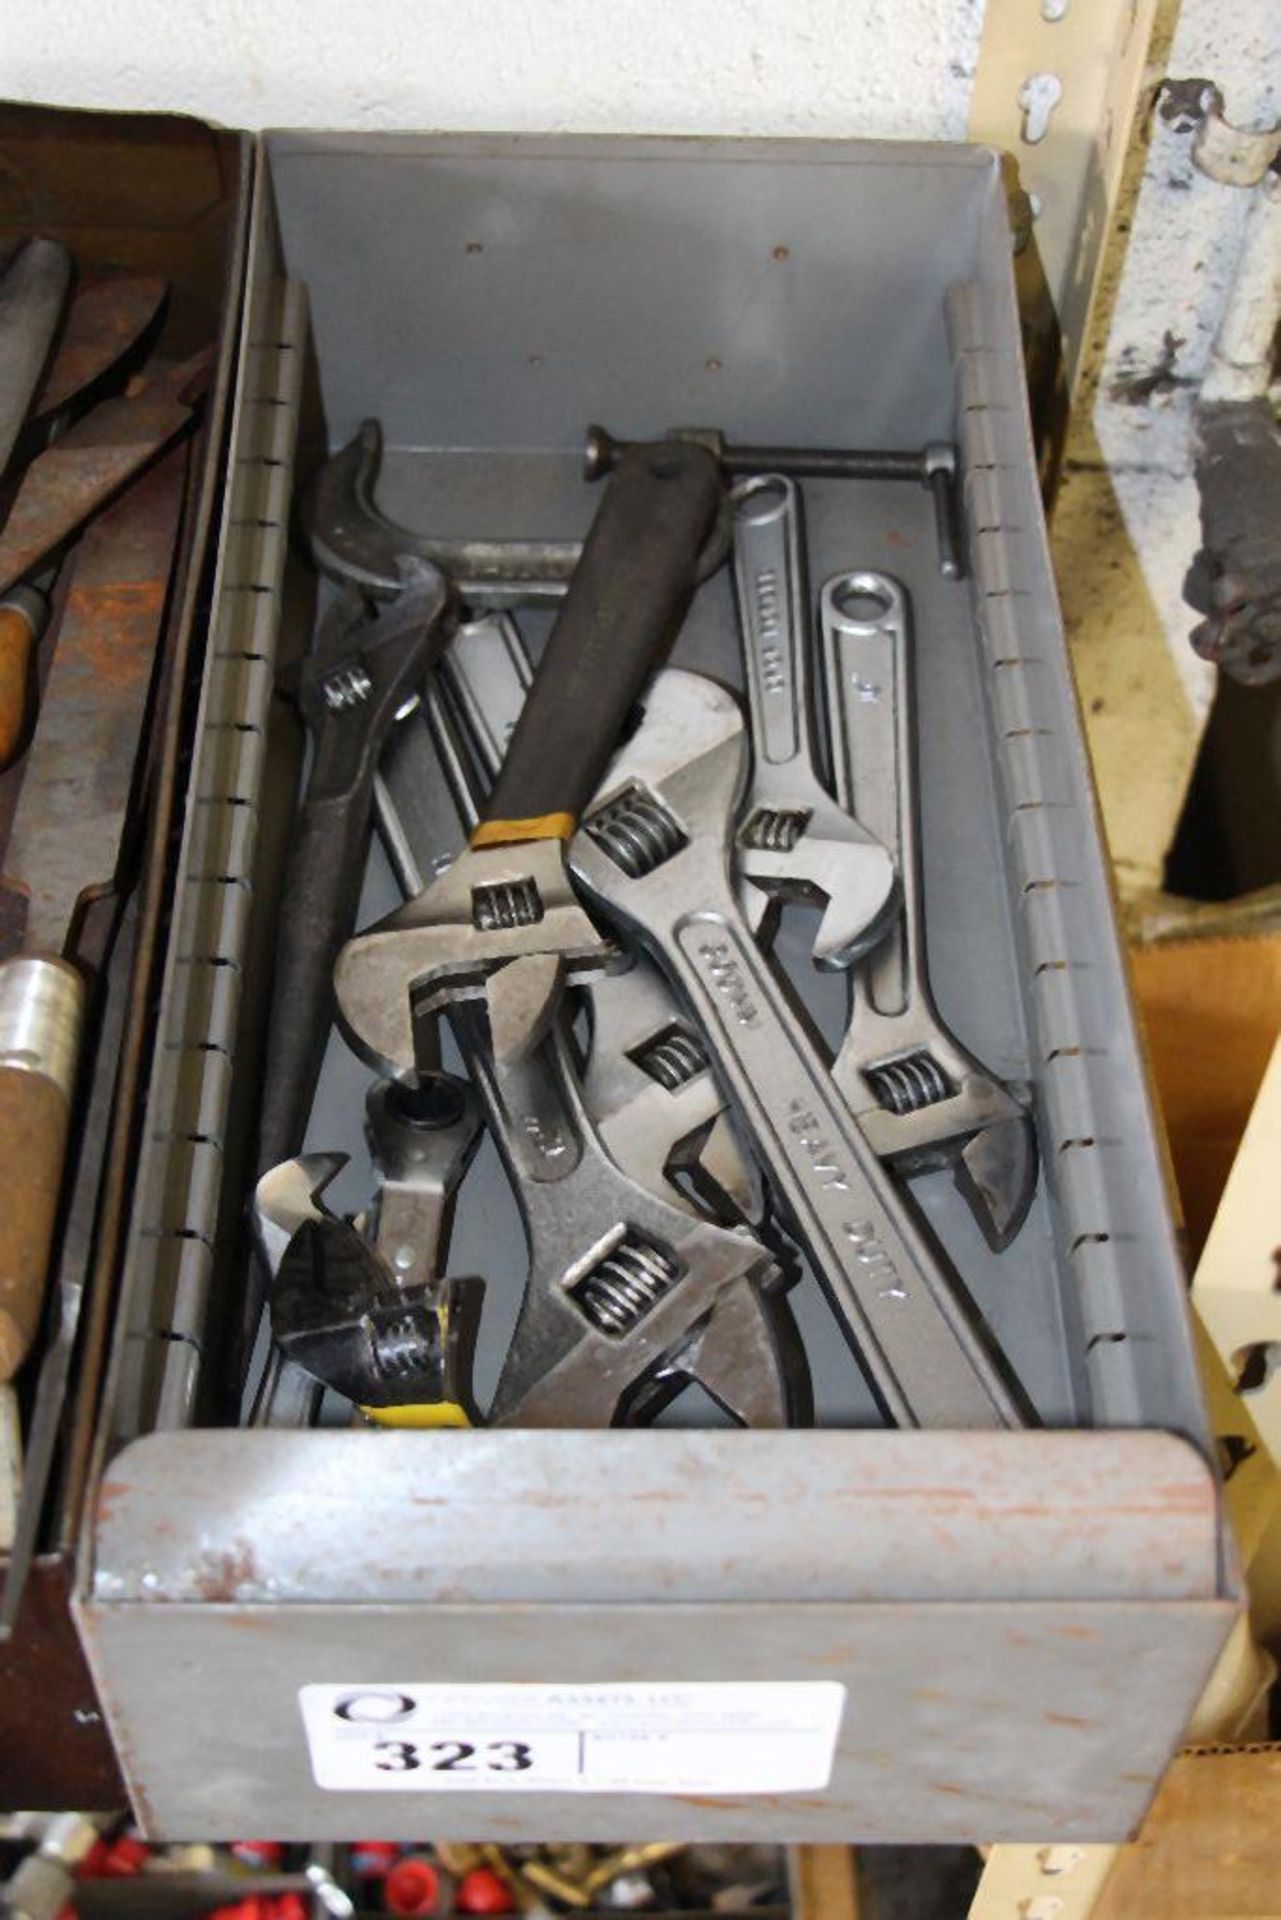 assortment of crescent wrenches